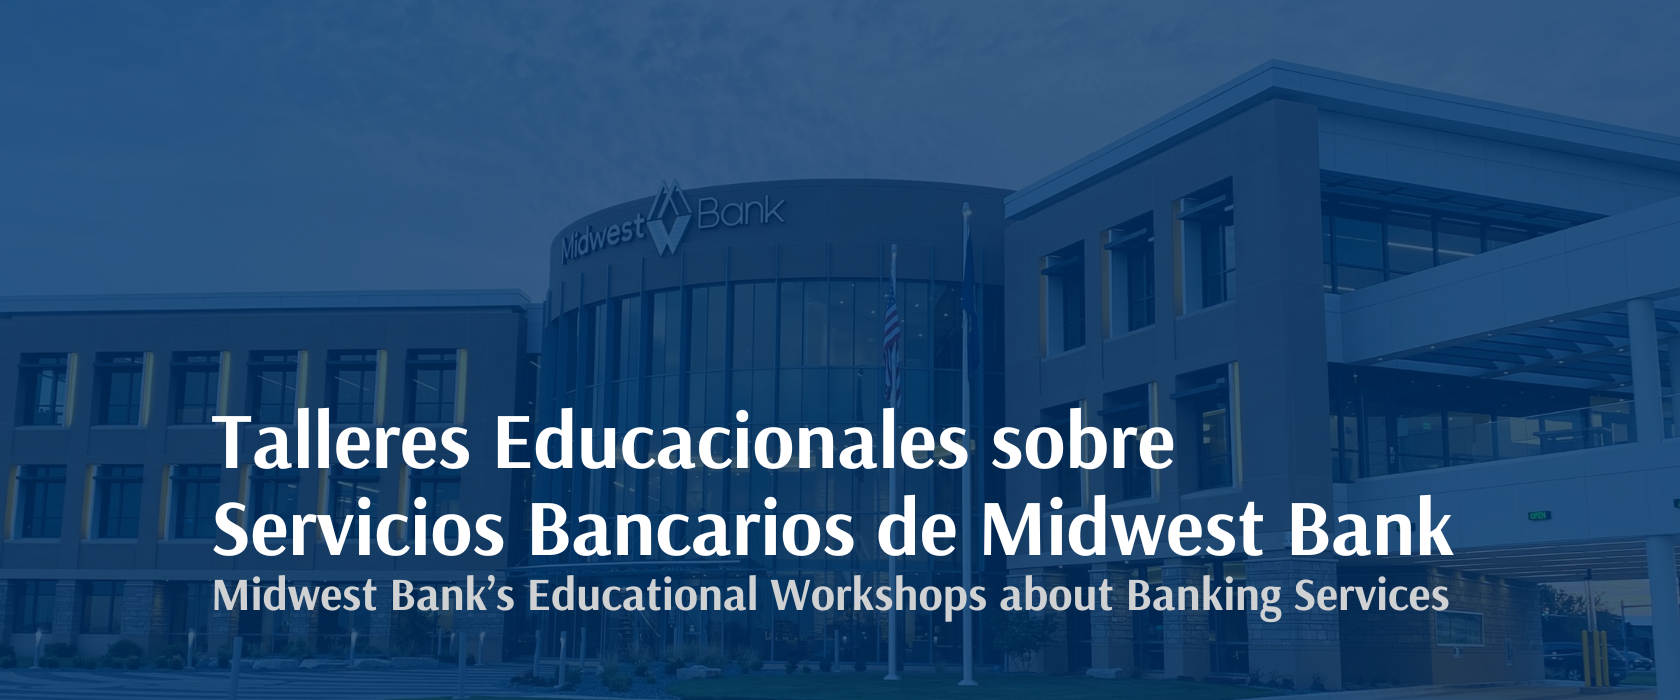 Educational Workshops on Banking Services in Spanish